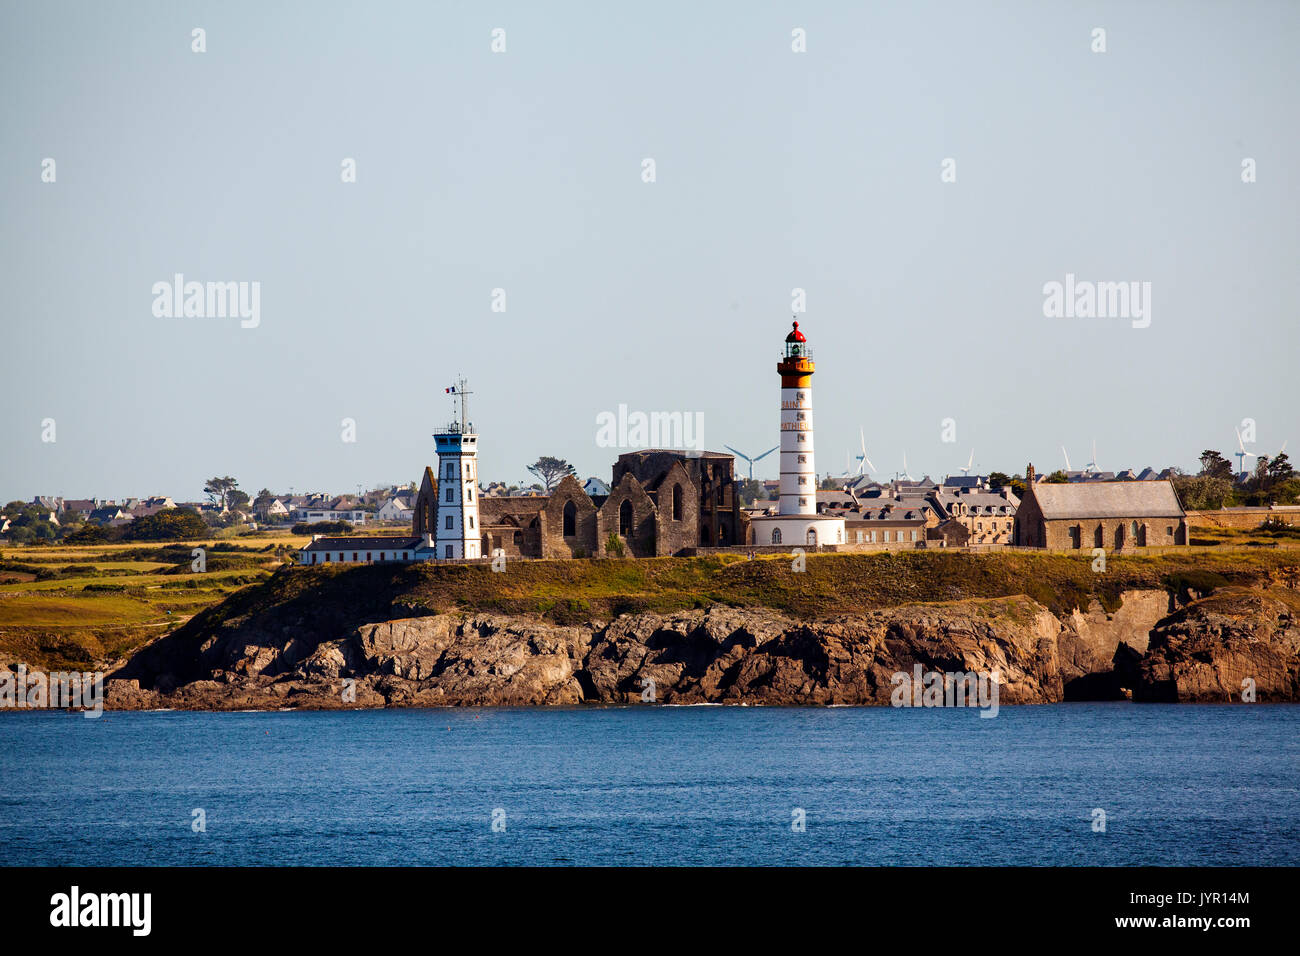 View of the Brittany headlands and the Abbaye Saint-Mathieu de fine Terre and Saint-Mathieu lighthouse seen from a ship in the Bay of Biscay France Stock Photo